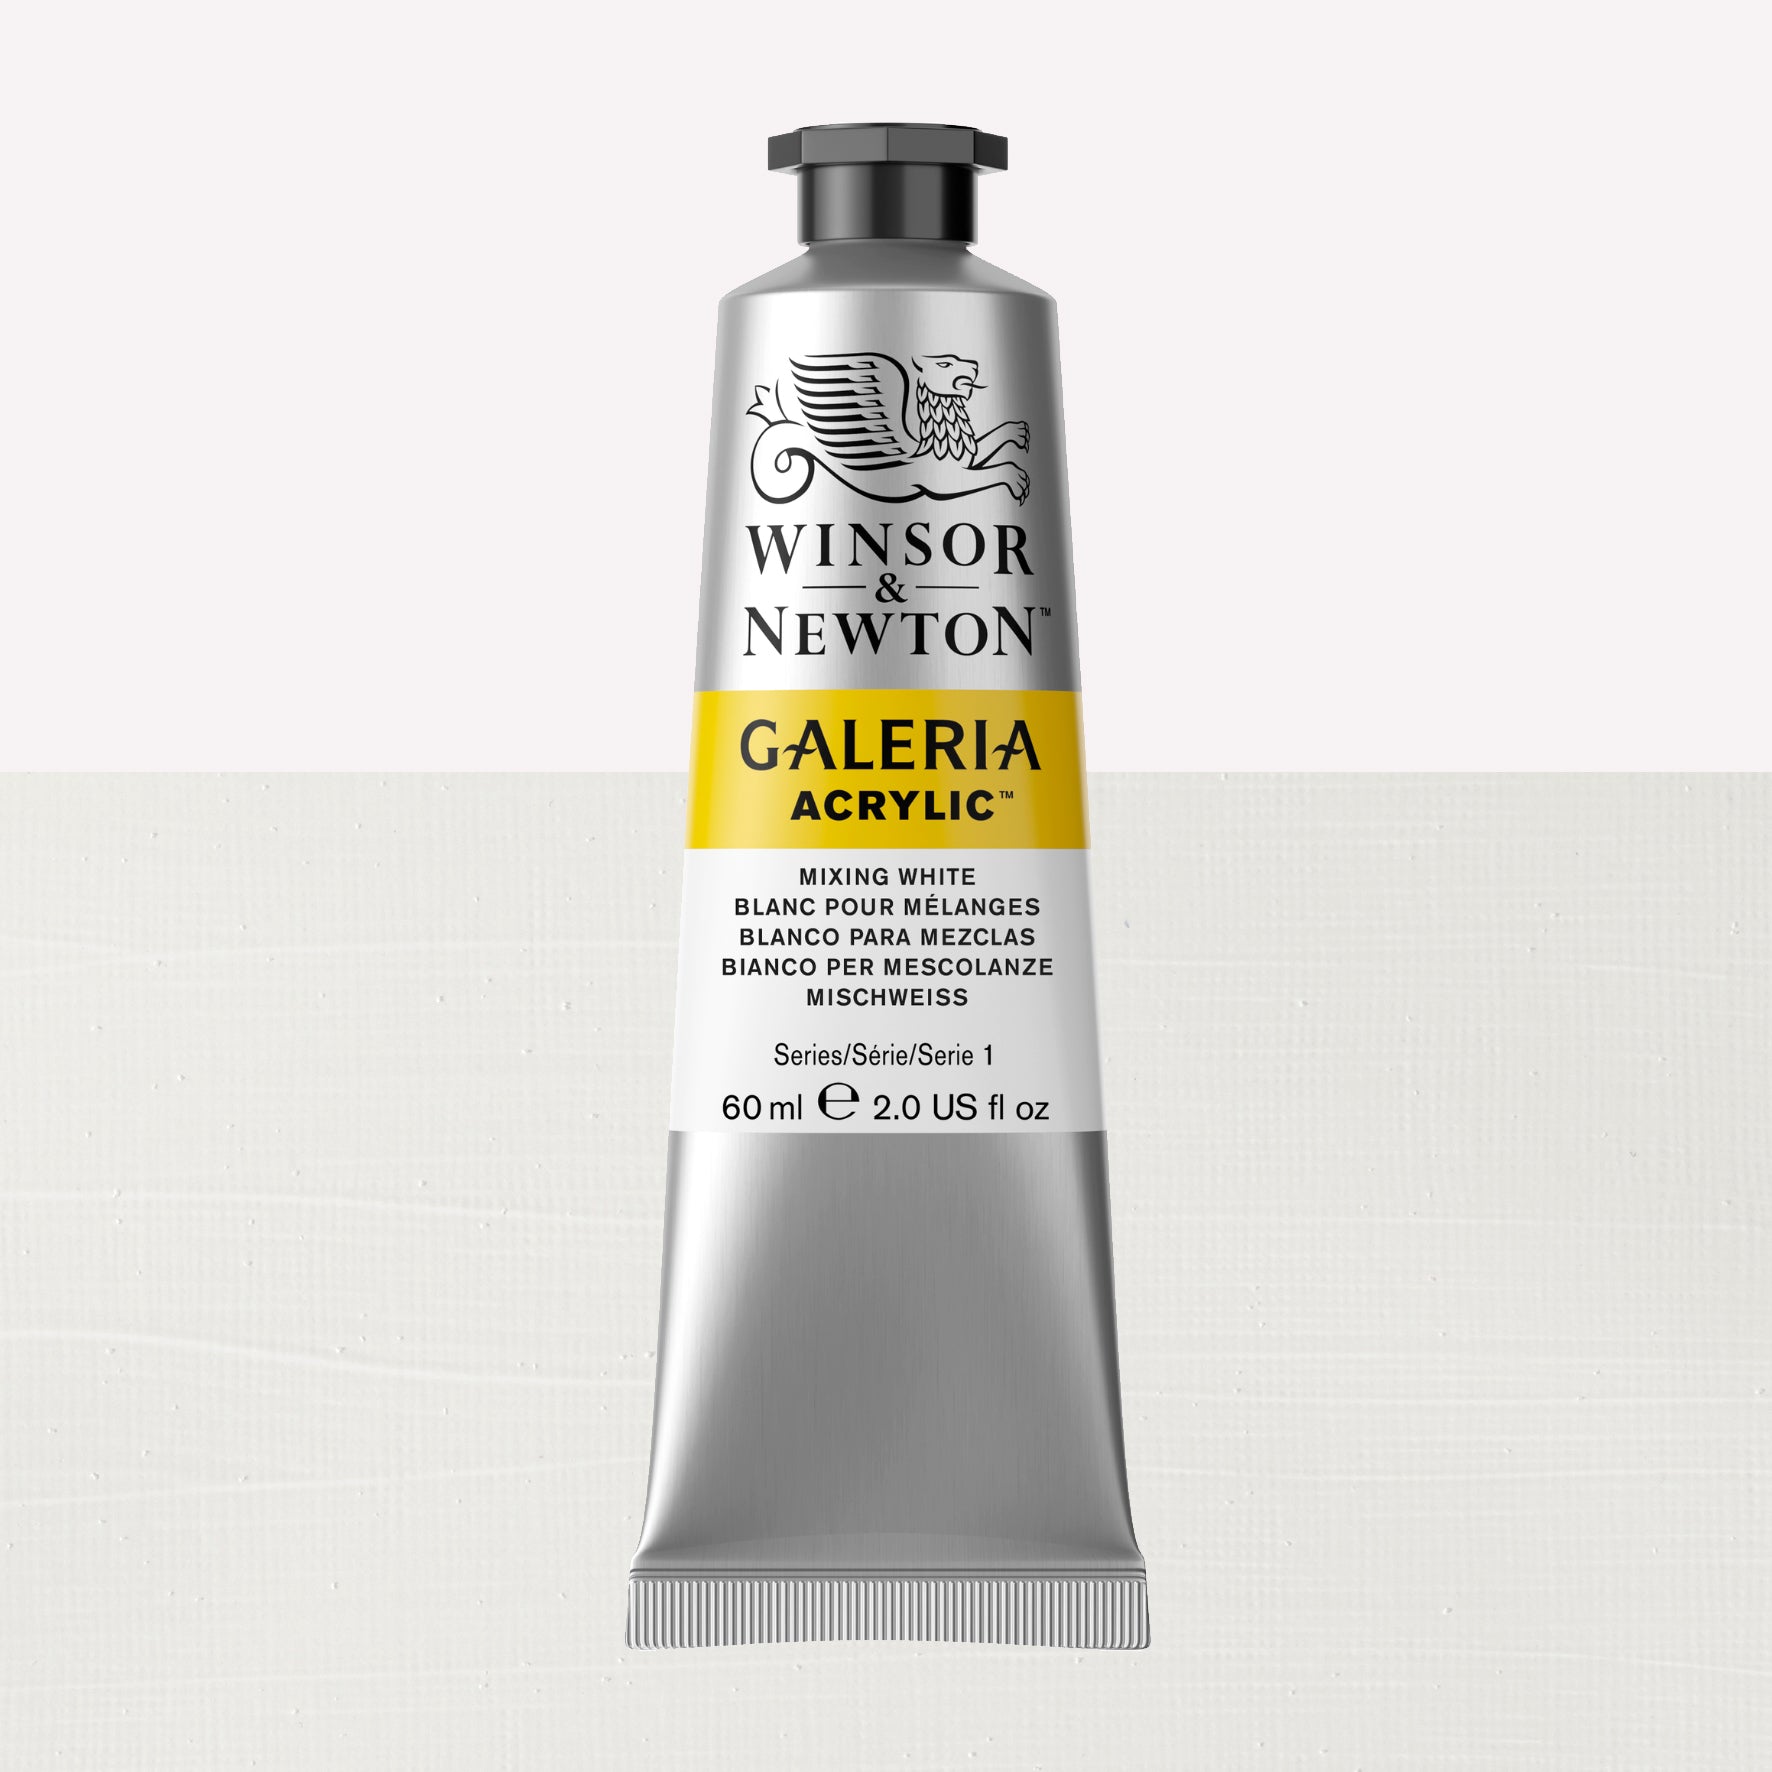 A 60ml tube of vibrant Galeria Acrylic paint in the shade Mixing White. This professional-quality paint is packaged in a silver tube with a black lid. Made by Winsor and Newton.